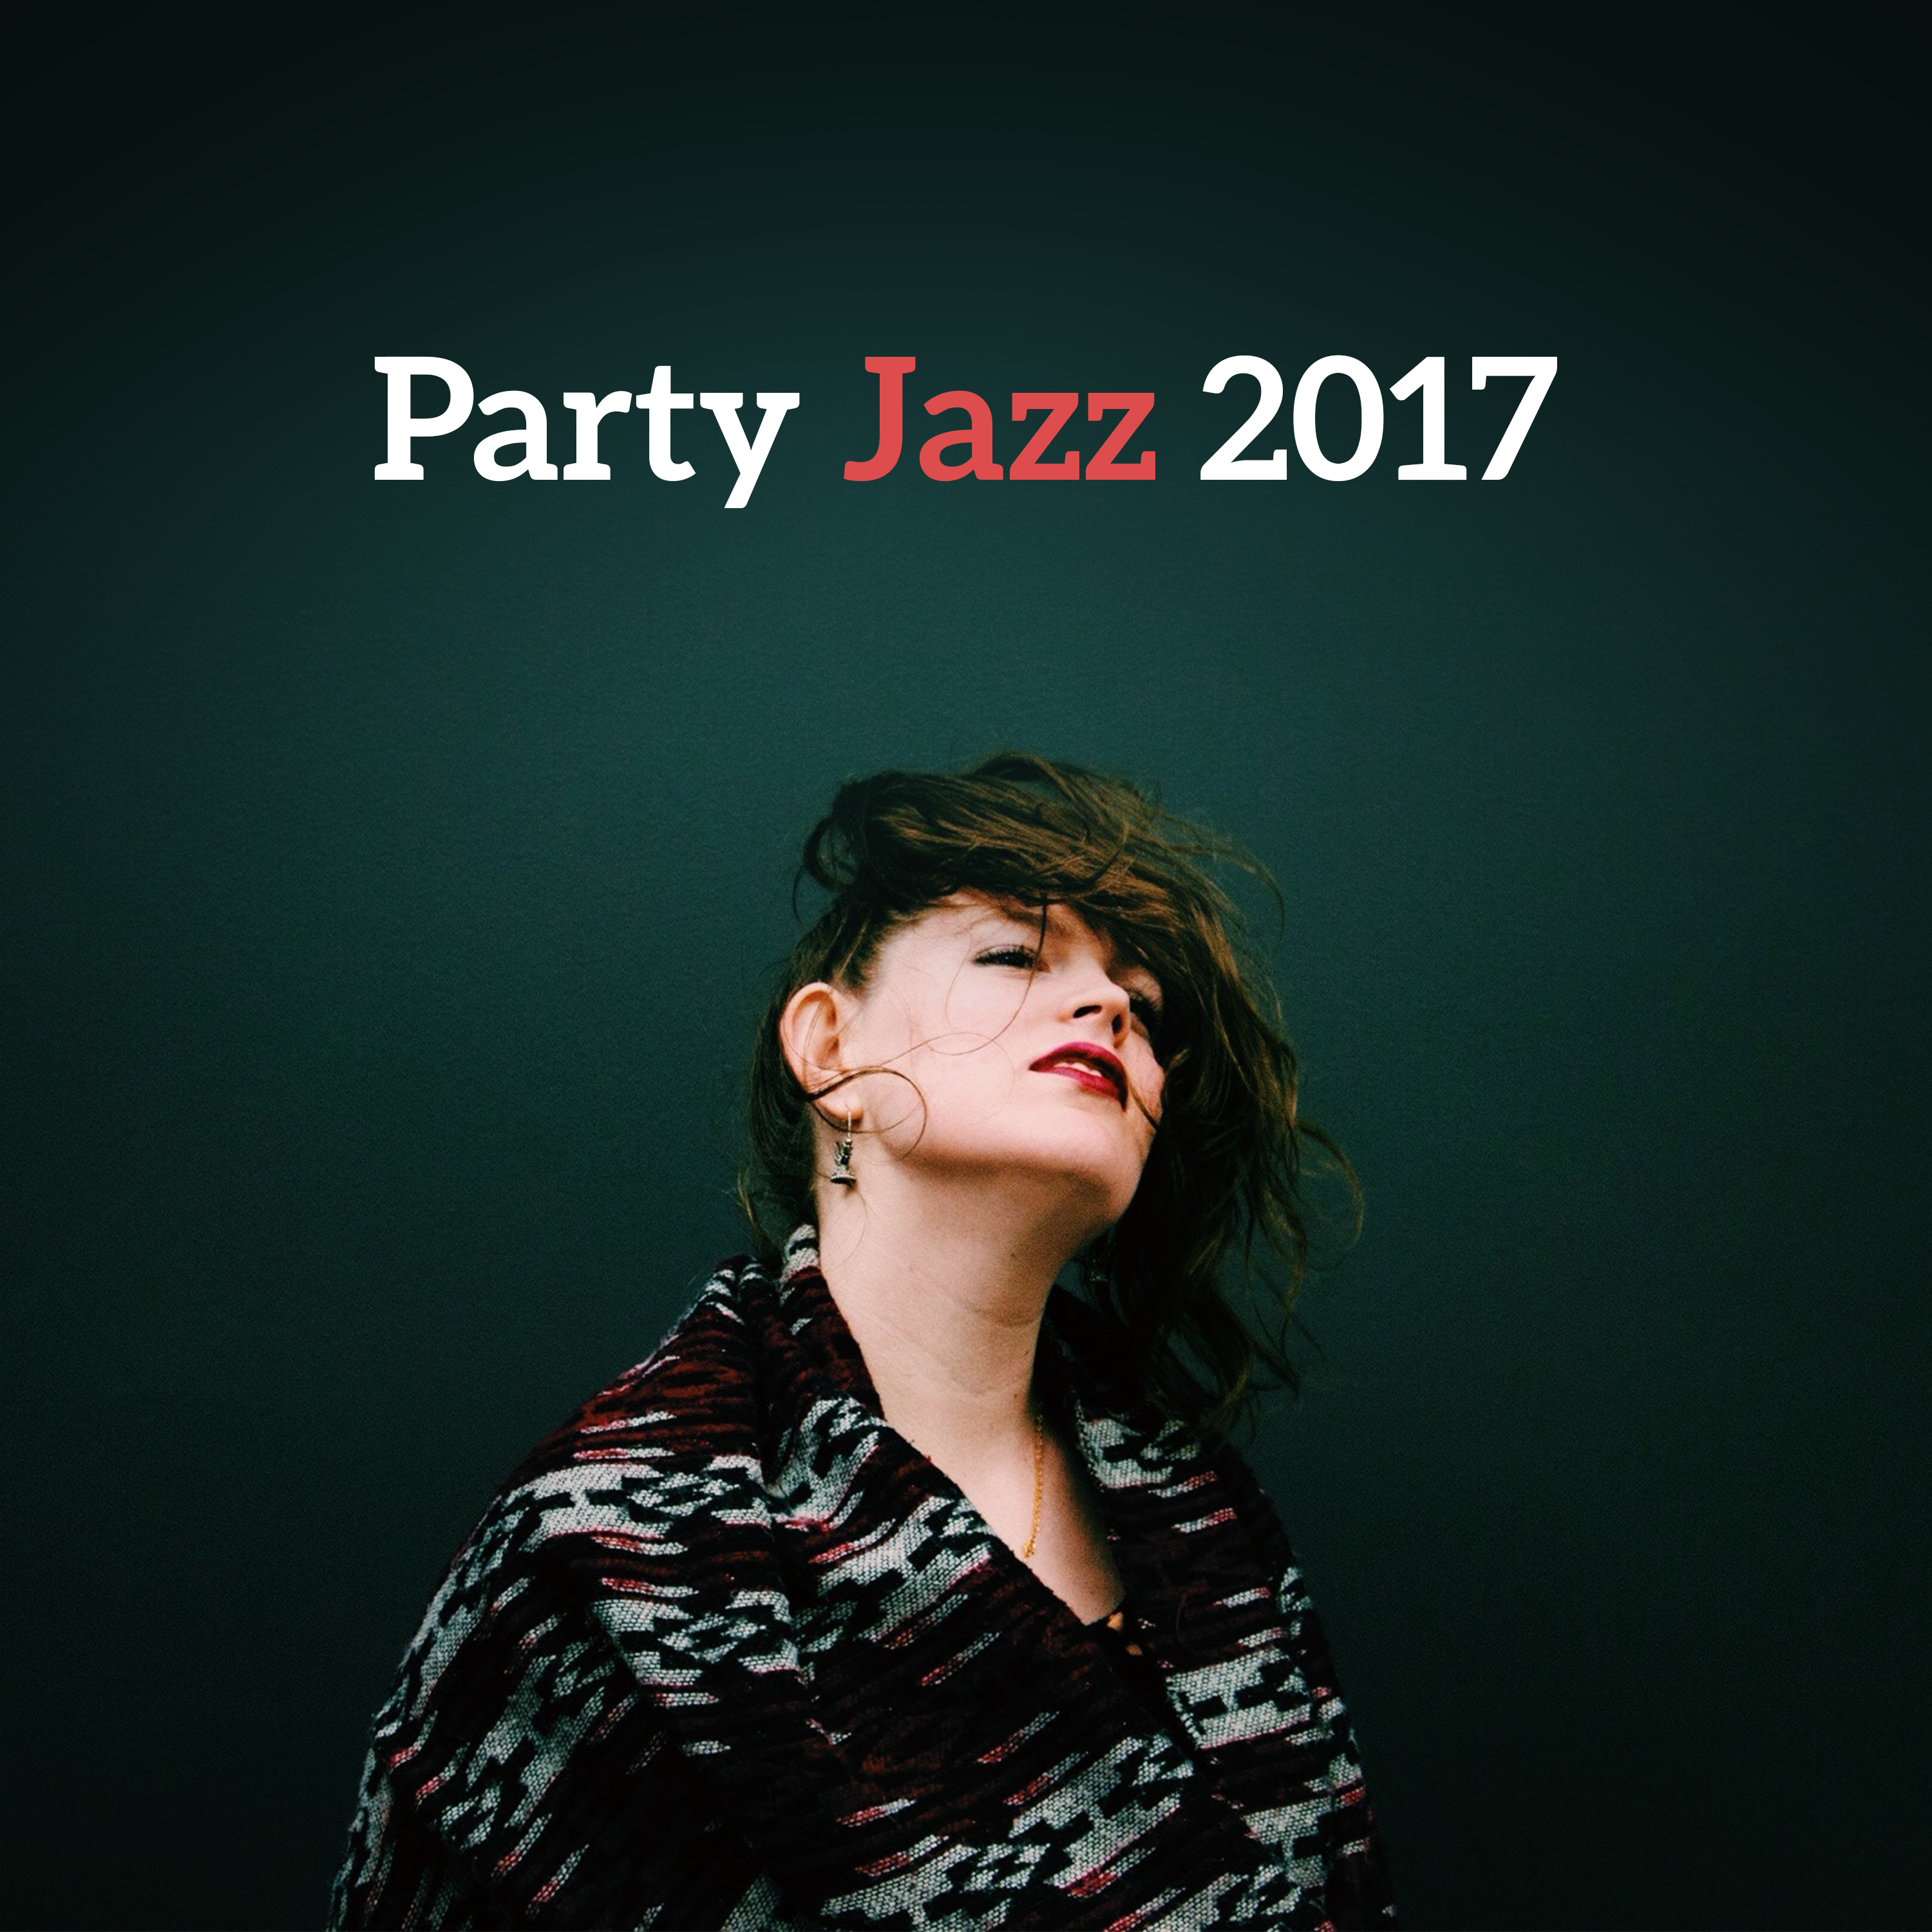 Party Jazz 2017 – Summer Jazz, Cocktail Party Music, Ambient Relaxation, Dinner